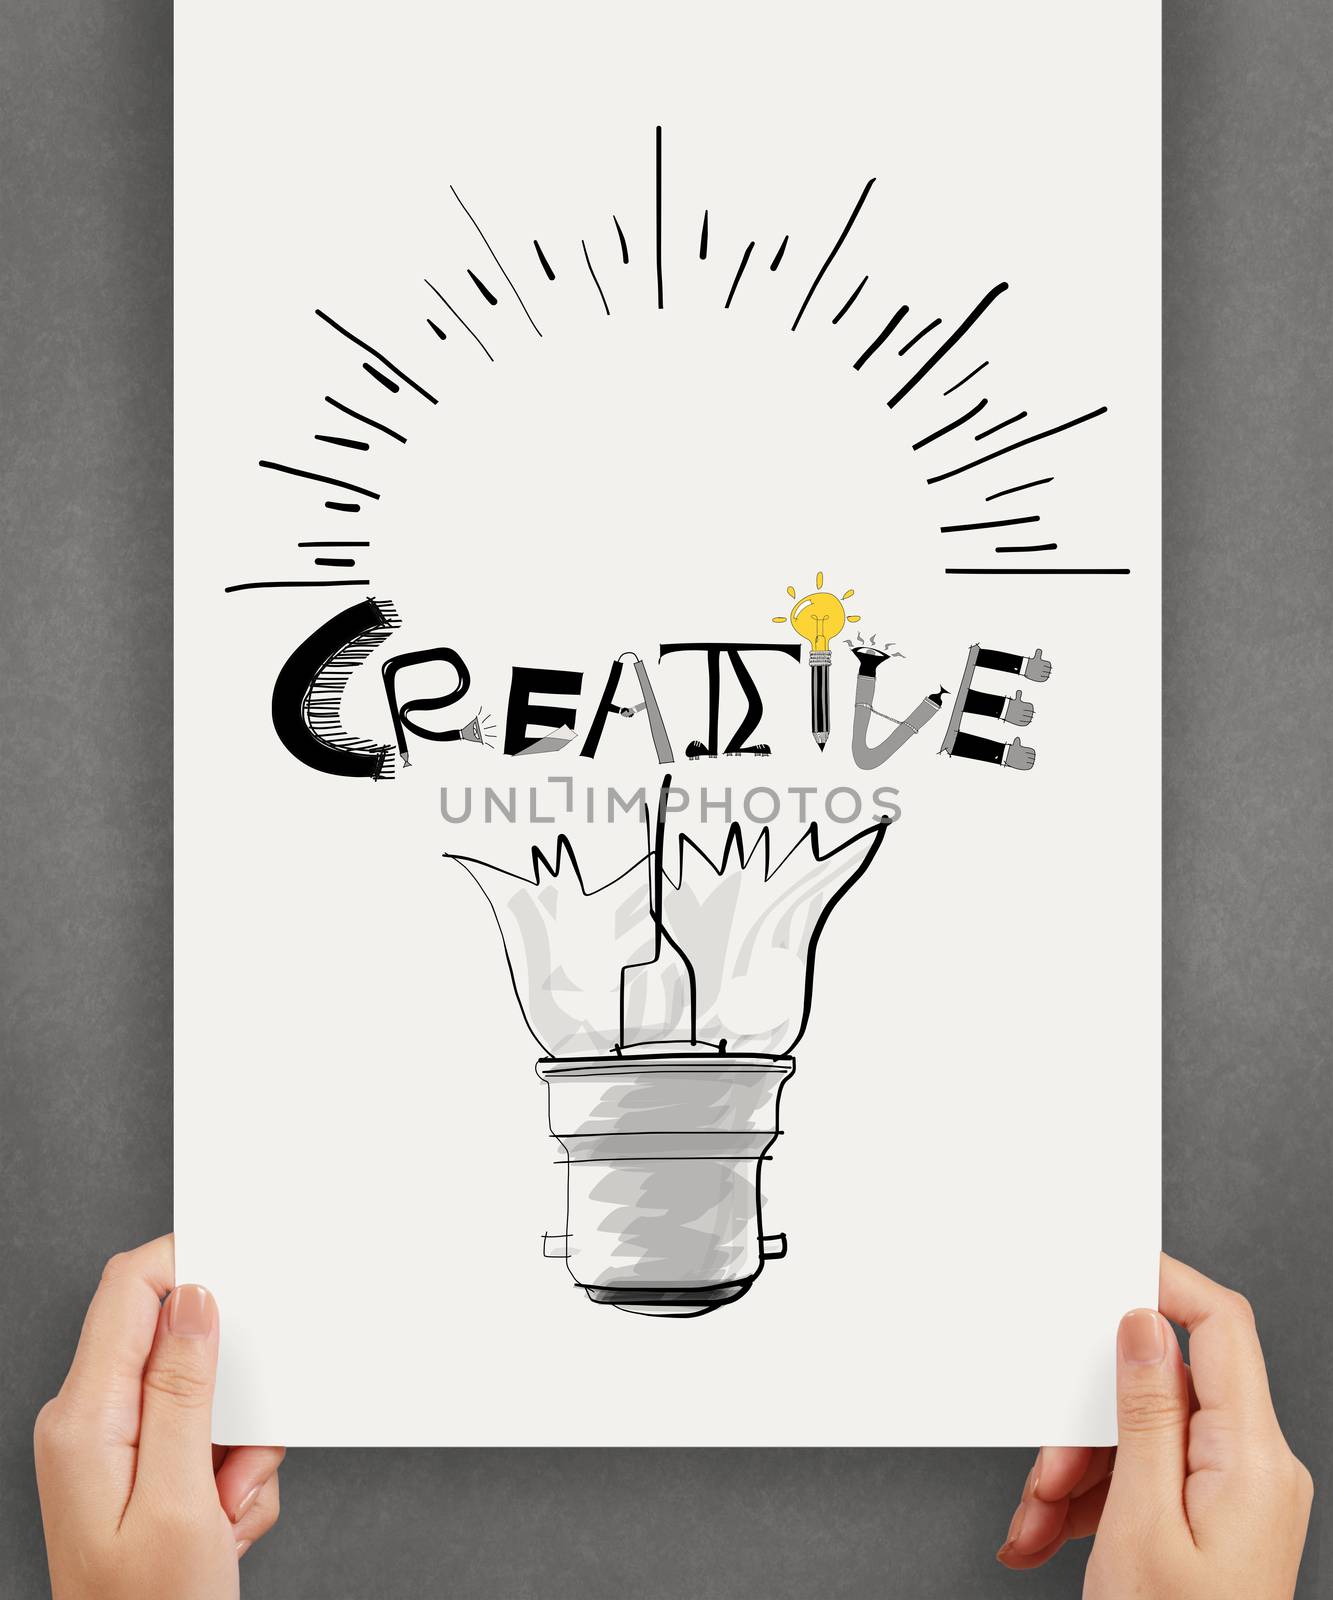 hannd show  light bulb and CREATIVE word design on paper background  as concept